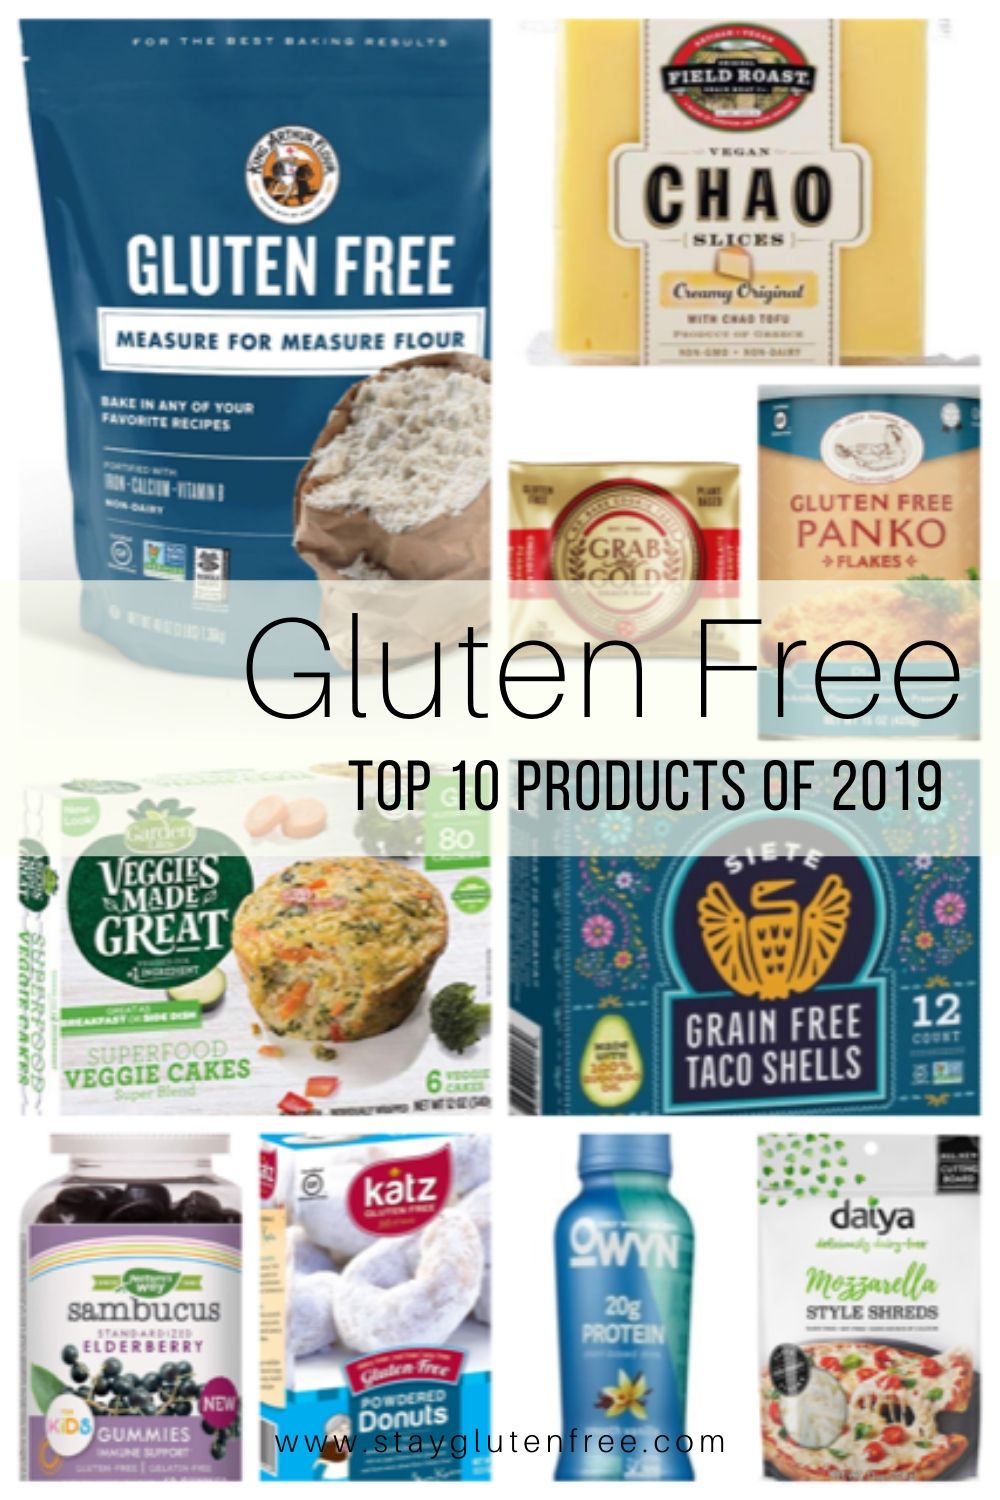 Top 10 Gluten Free Products of 2019